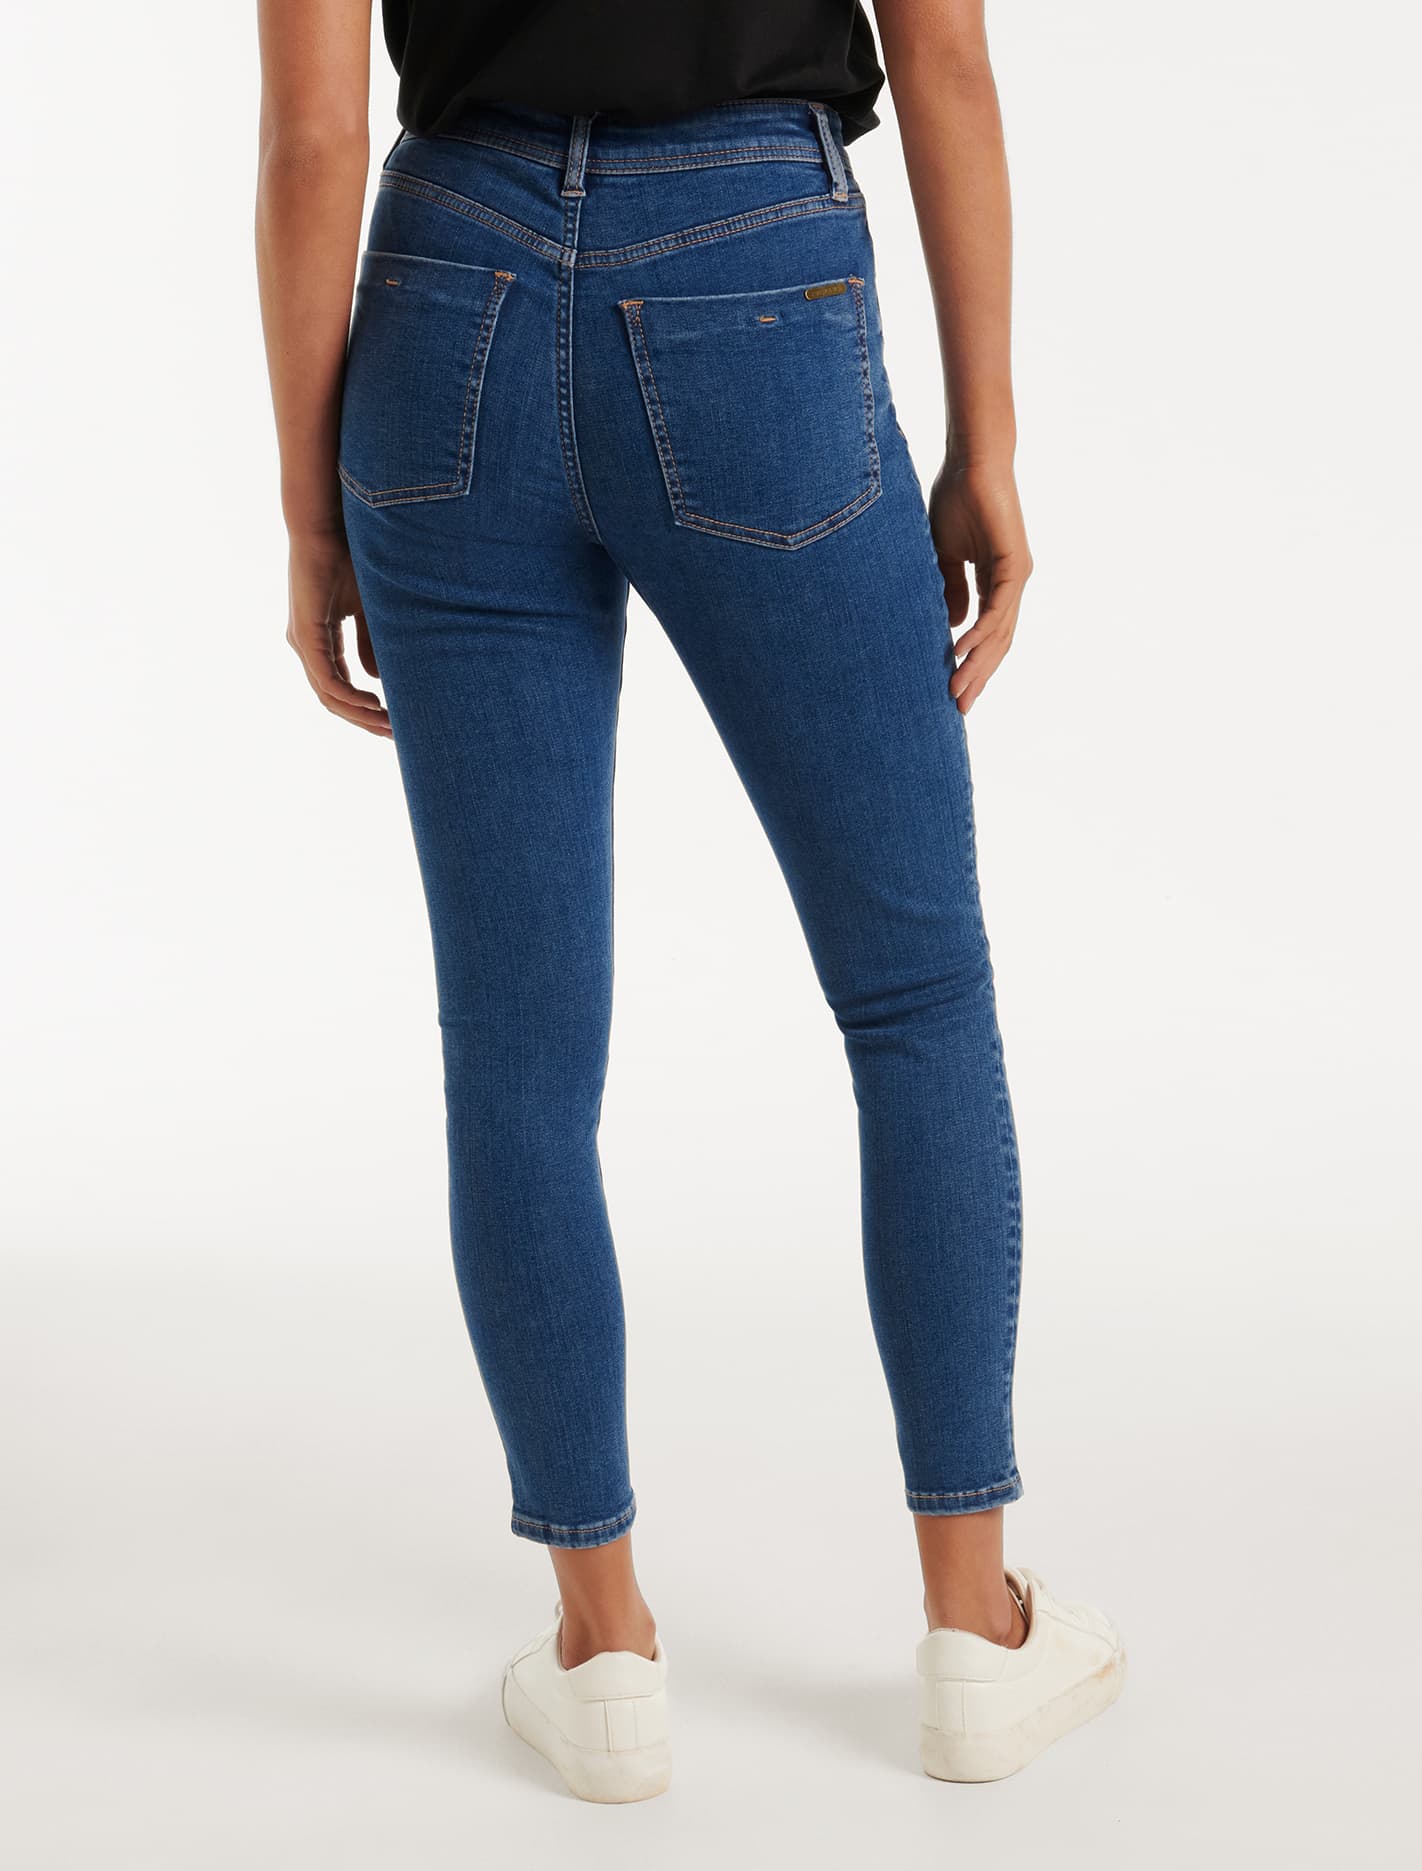 Nala Curvy Mid-Rise Skinny Jeans La Lucia | Forever New